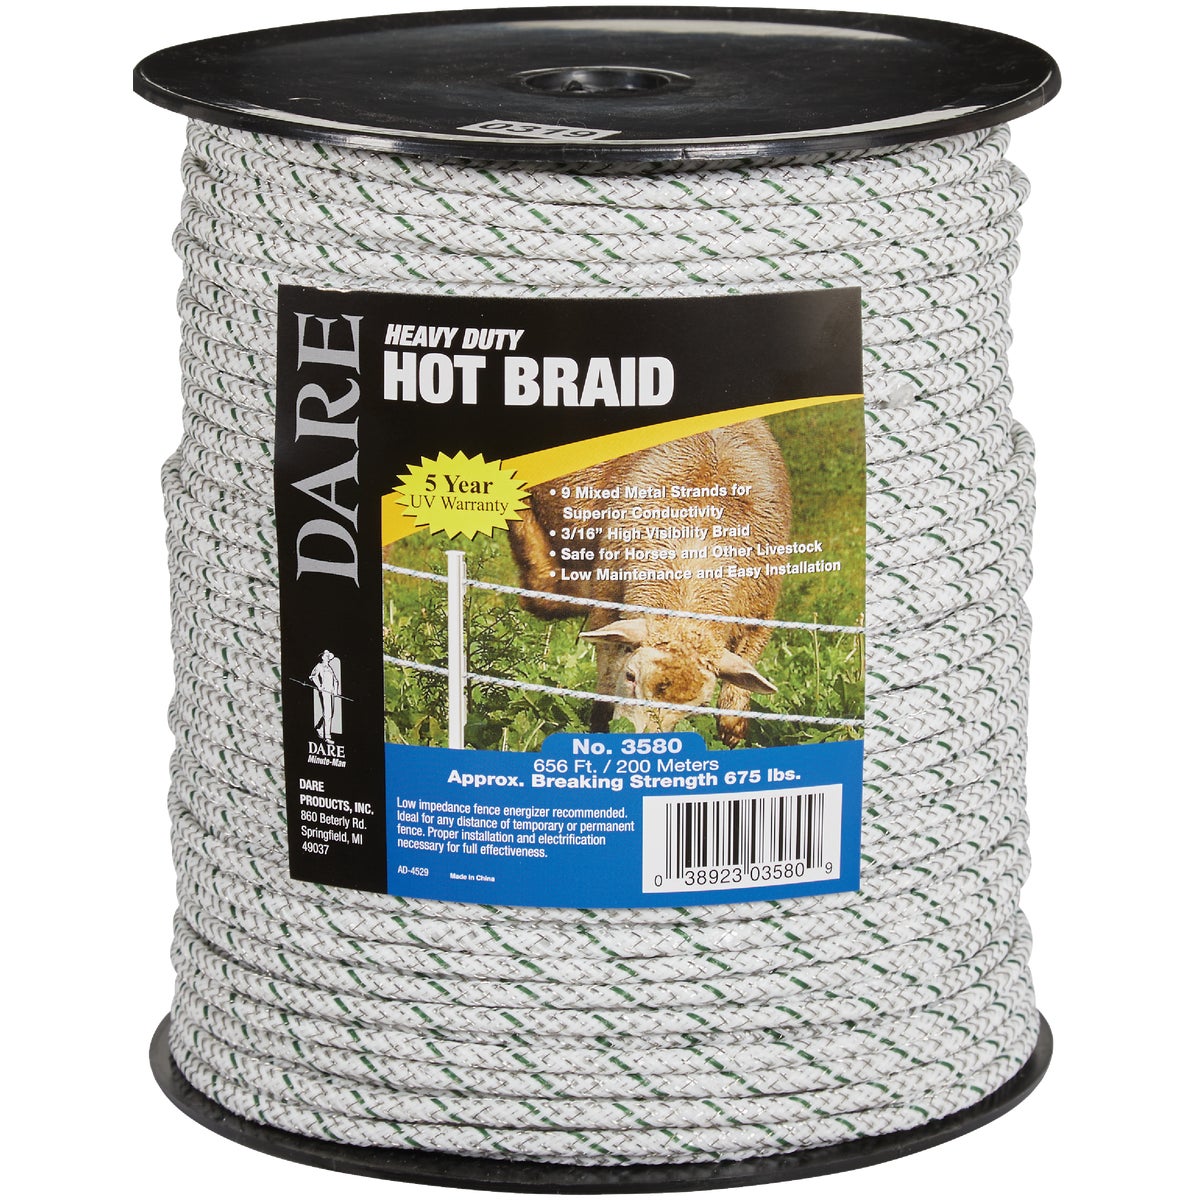 Dare 3/16 In. x 656 Ft. Hot Braid Poly Rope